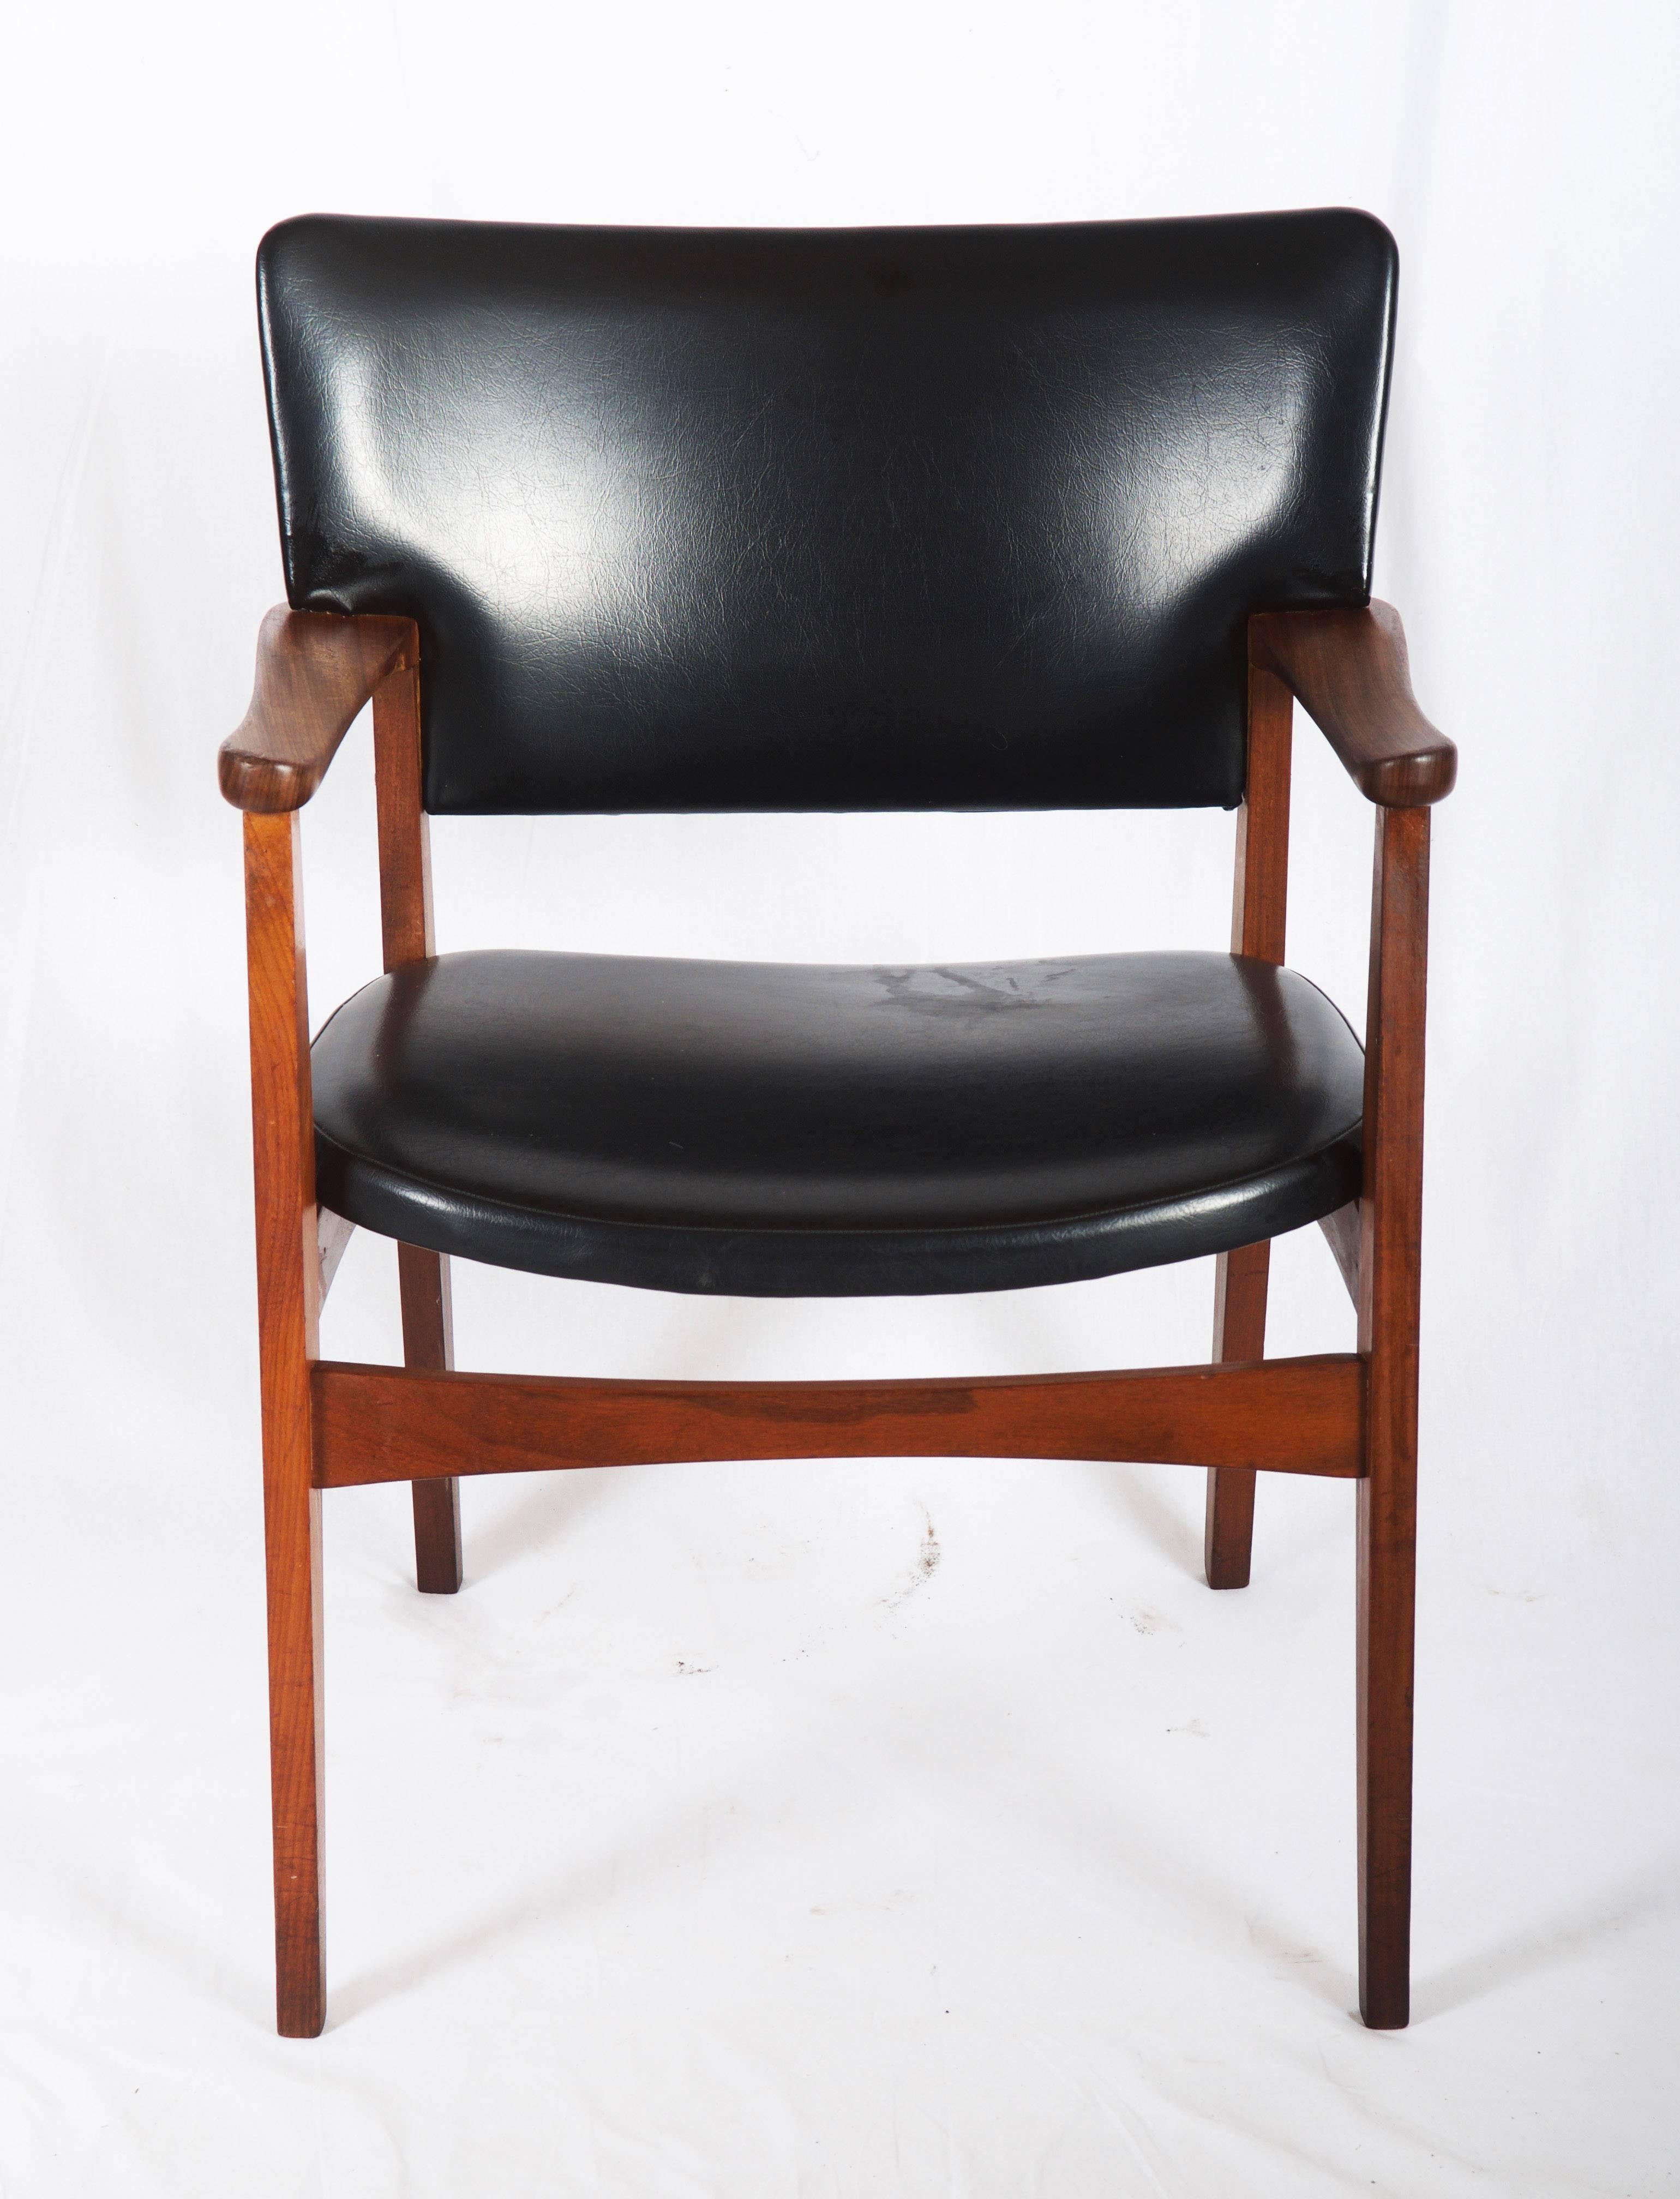 Solid teak frame with upholstered seat and backrest in black leatherette. Made in Denmark in the late 1950s. New upholstery on request possible (150$ + cost of the leather fabric)